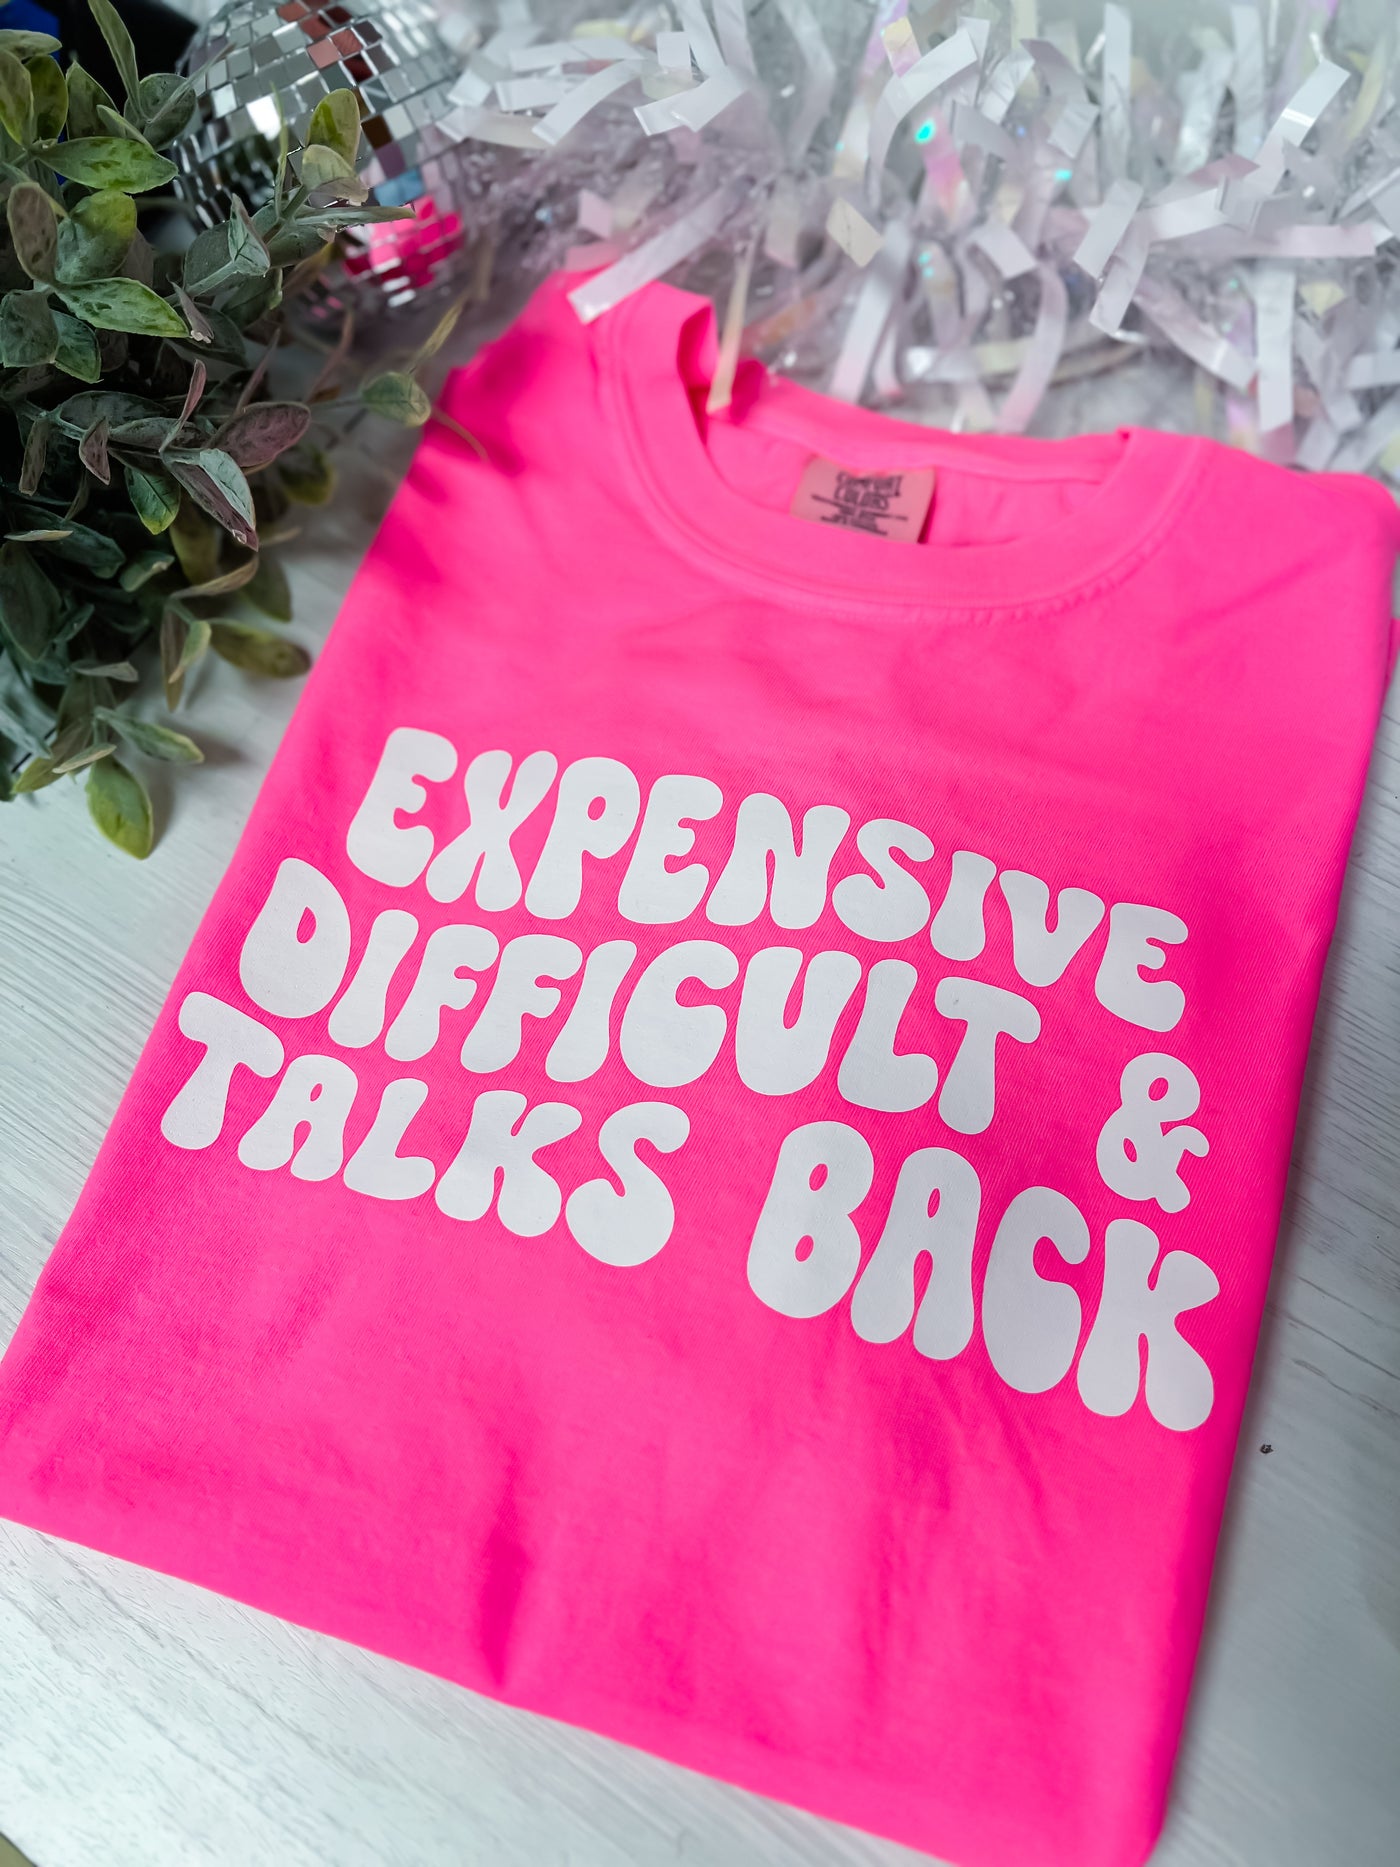 READY TO SHIP "Expensive, Difficult, & Talks Back" T-shirt